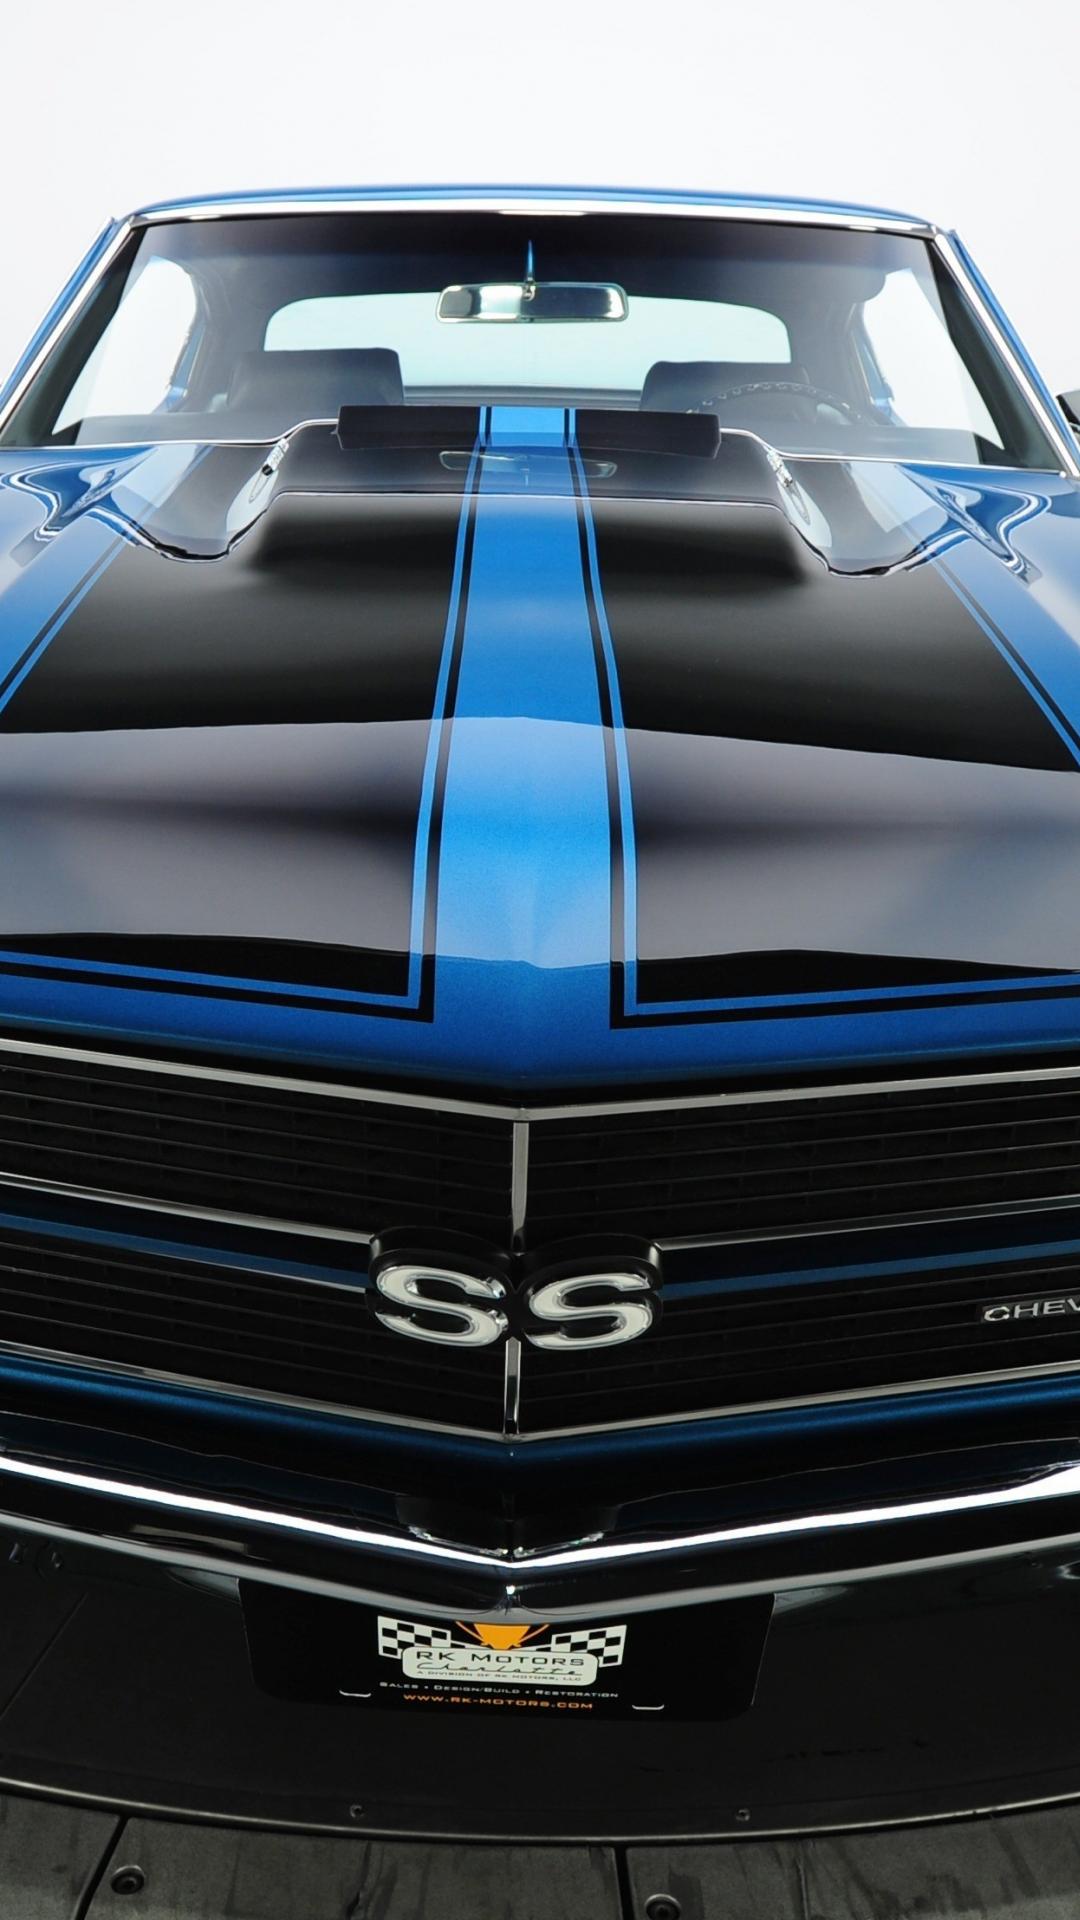 Chevy Chevelle Muscle Car Wallpaper Free Chevy Chevelle